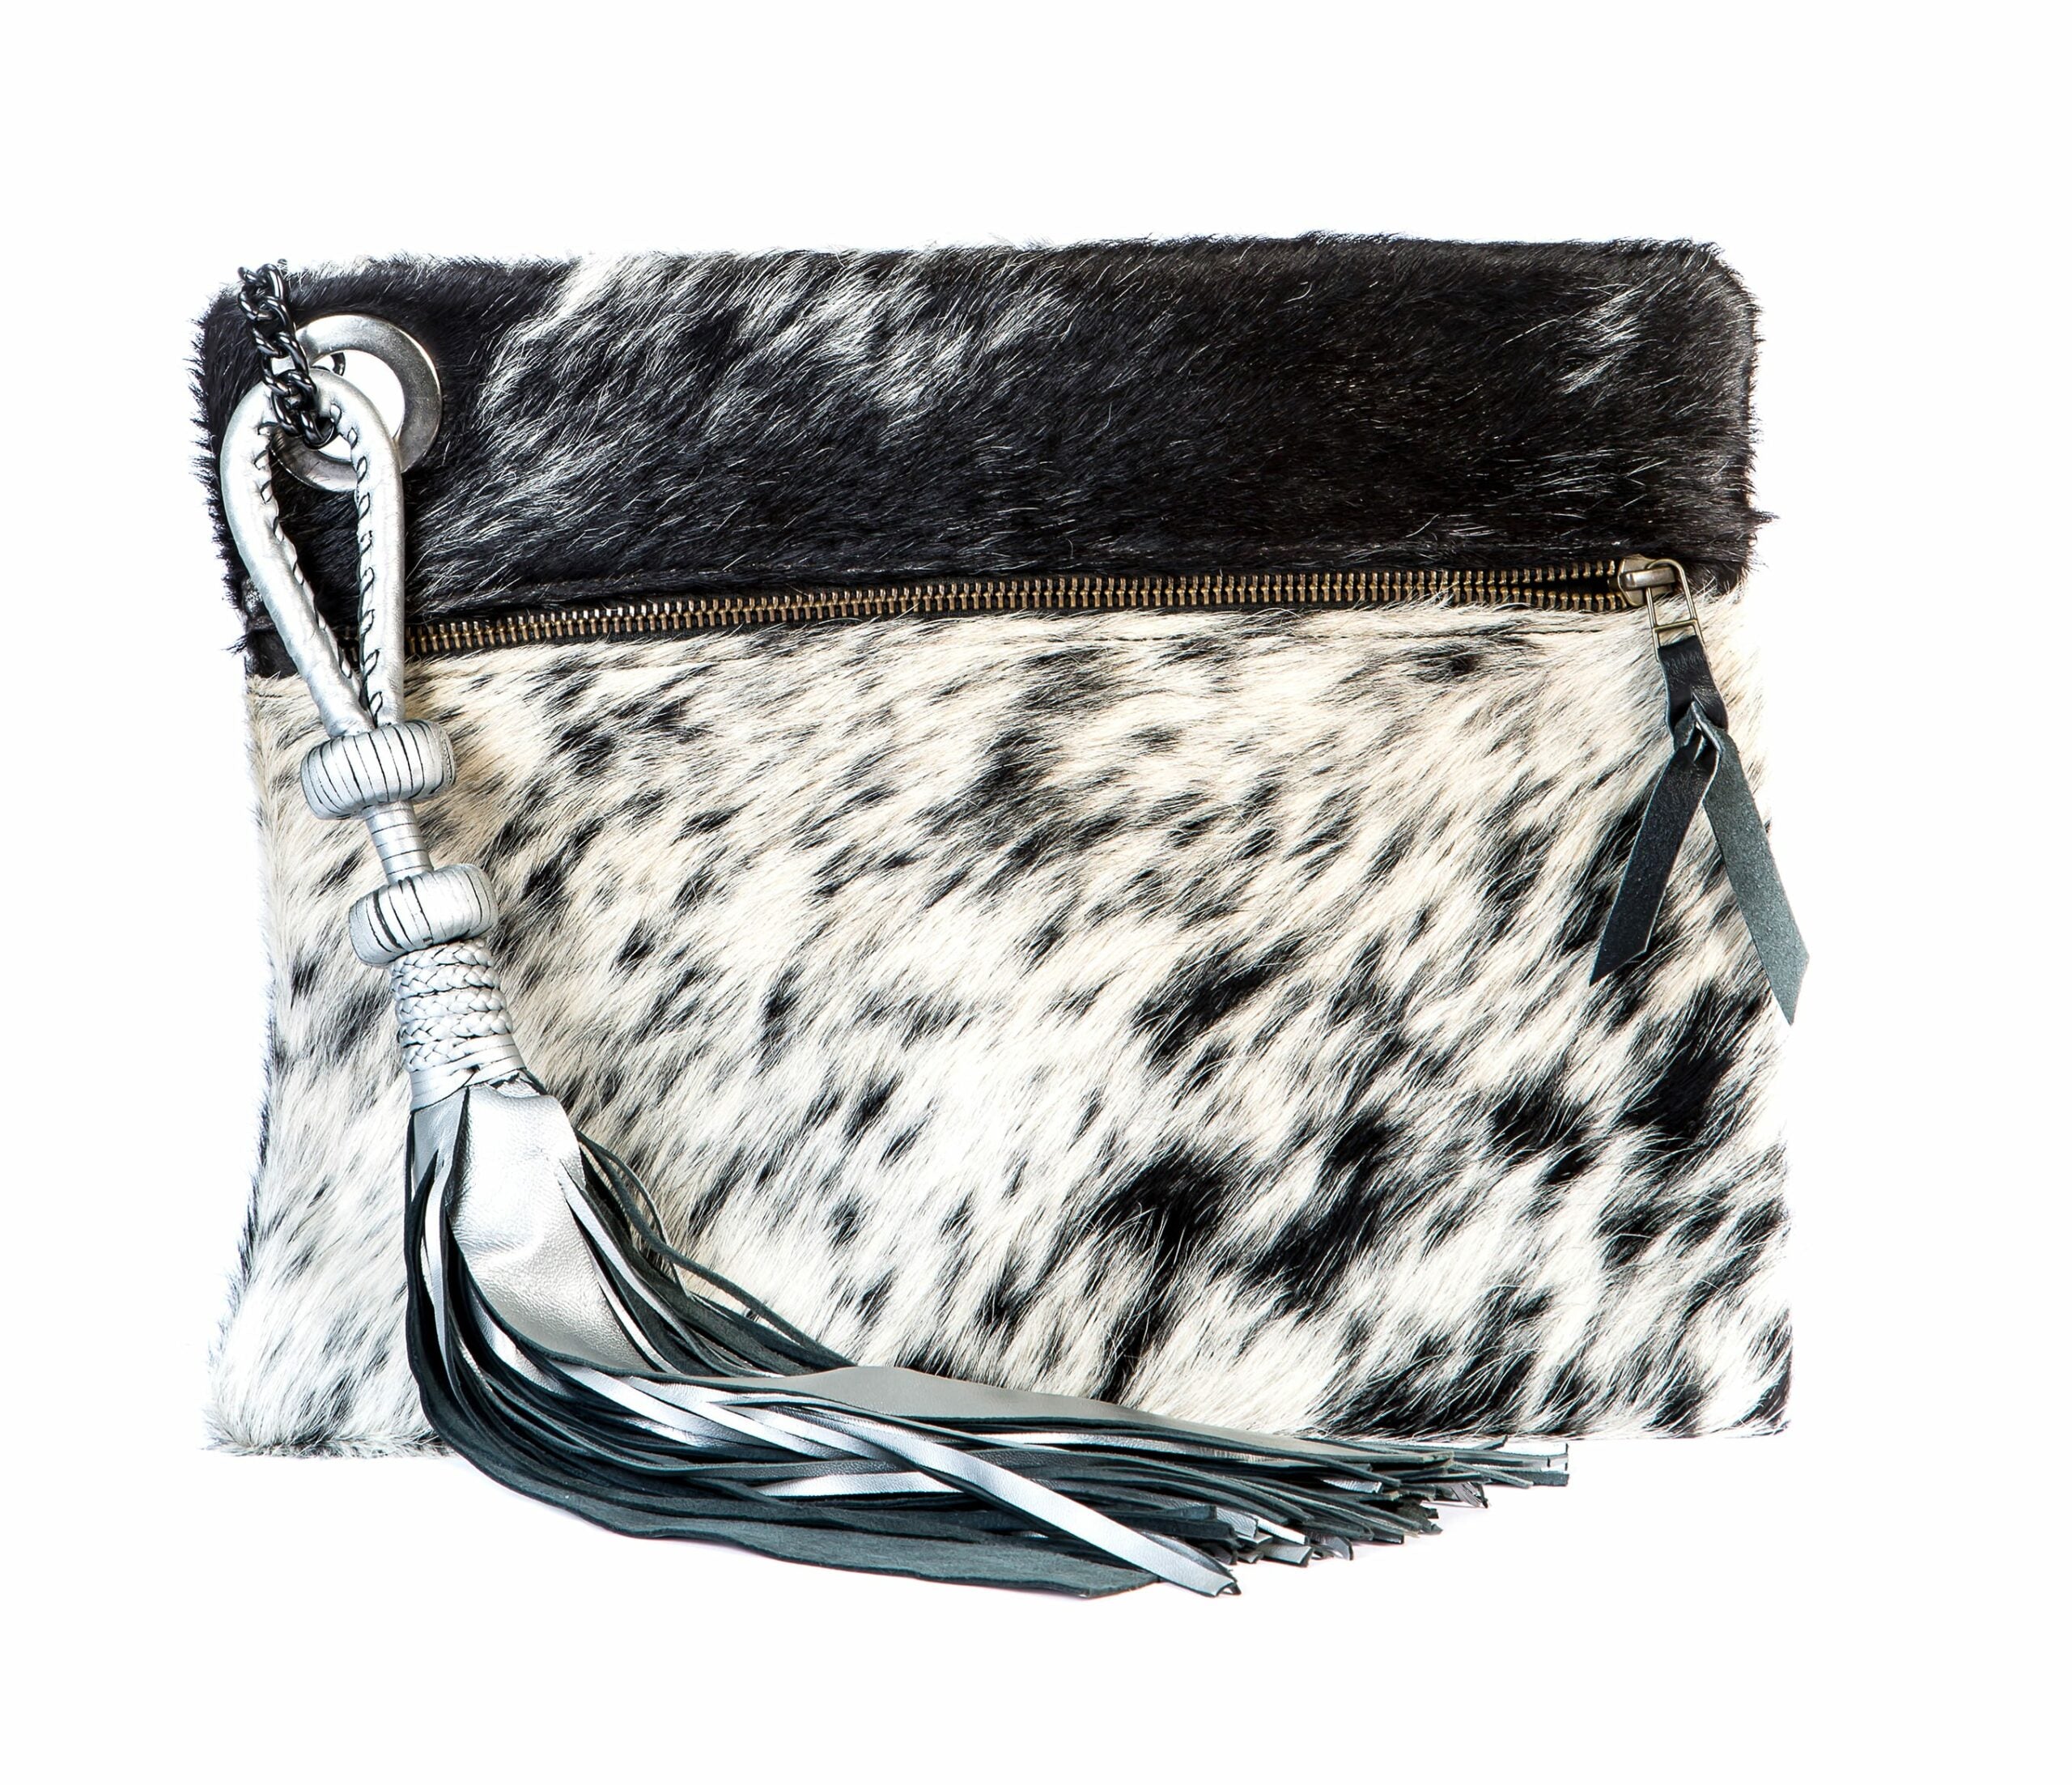 Tip Corner: How to rock our cowhide & leather clutches